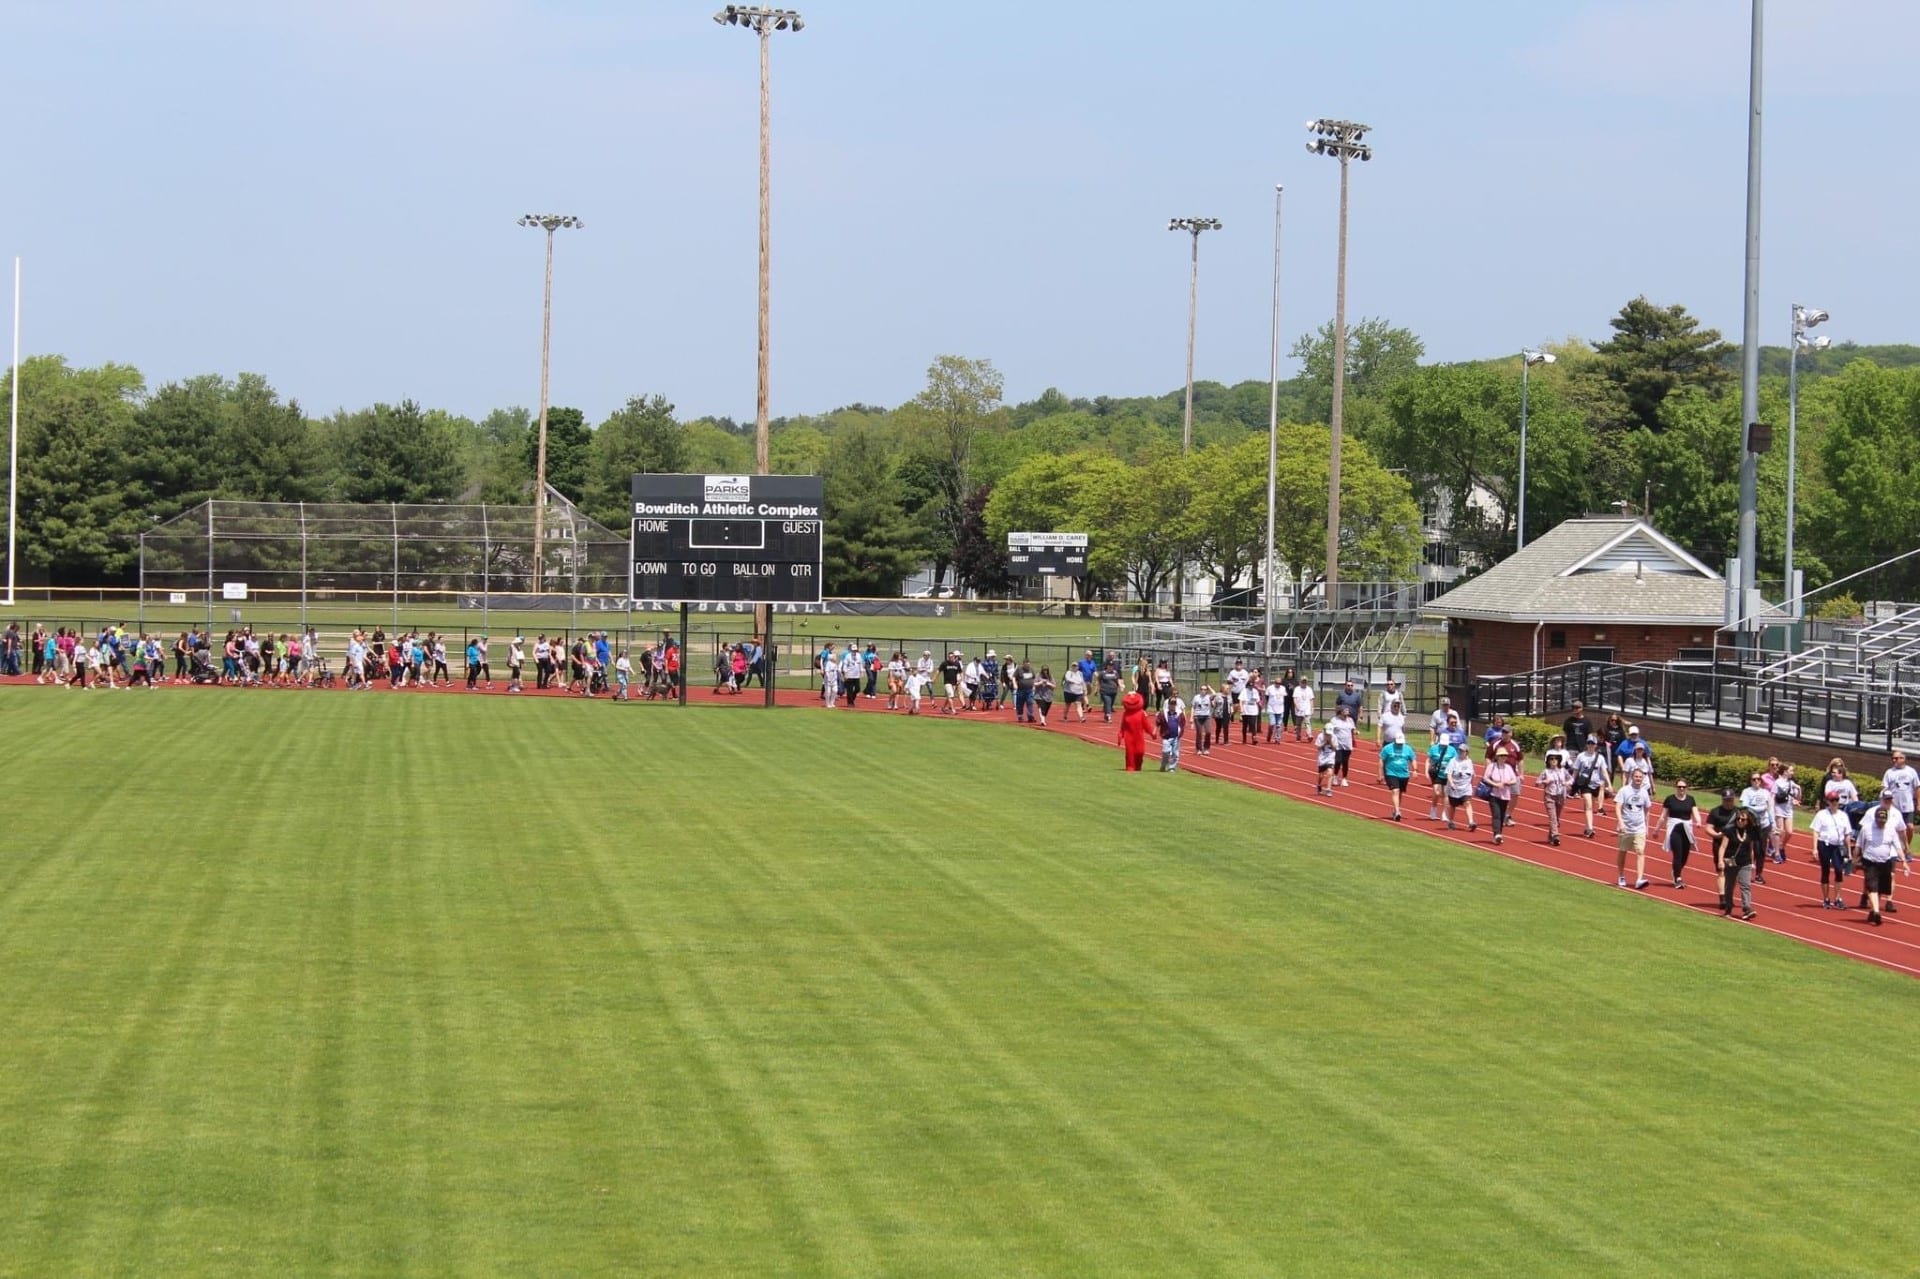 People walk around a grass field on a red track on a sunny day in May.